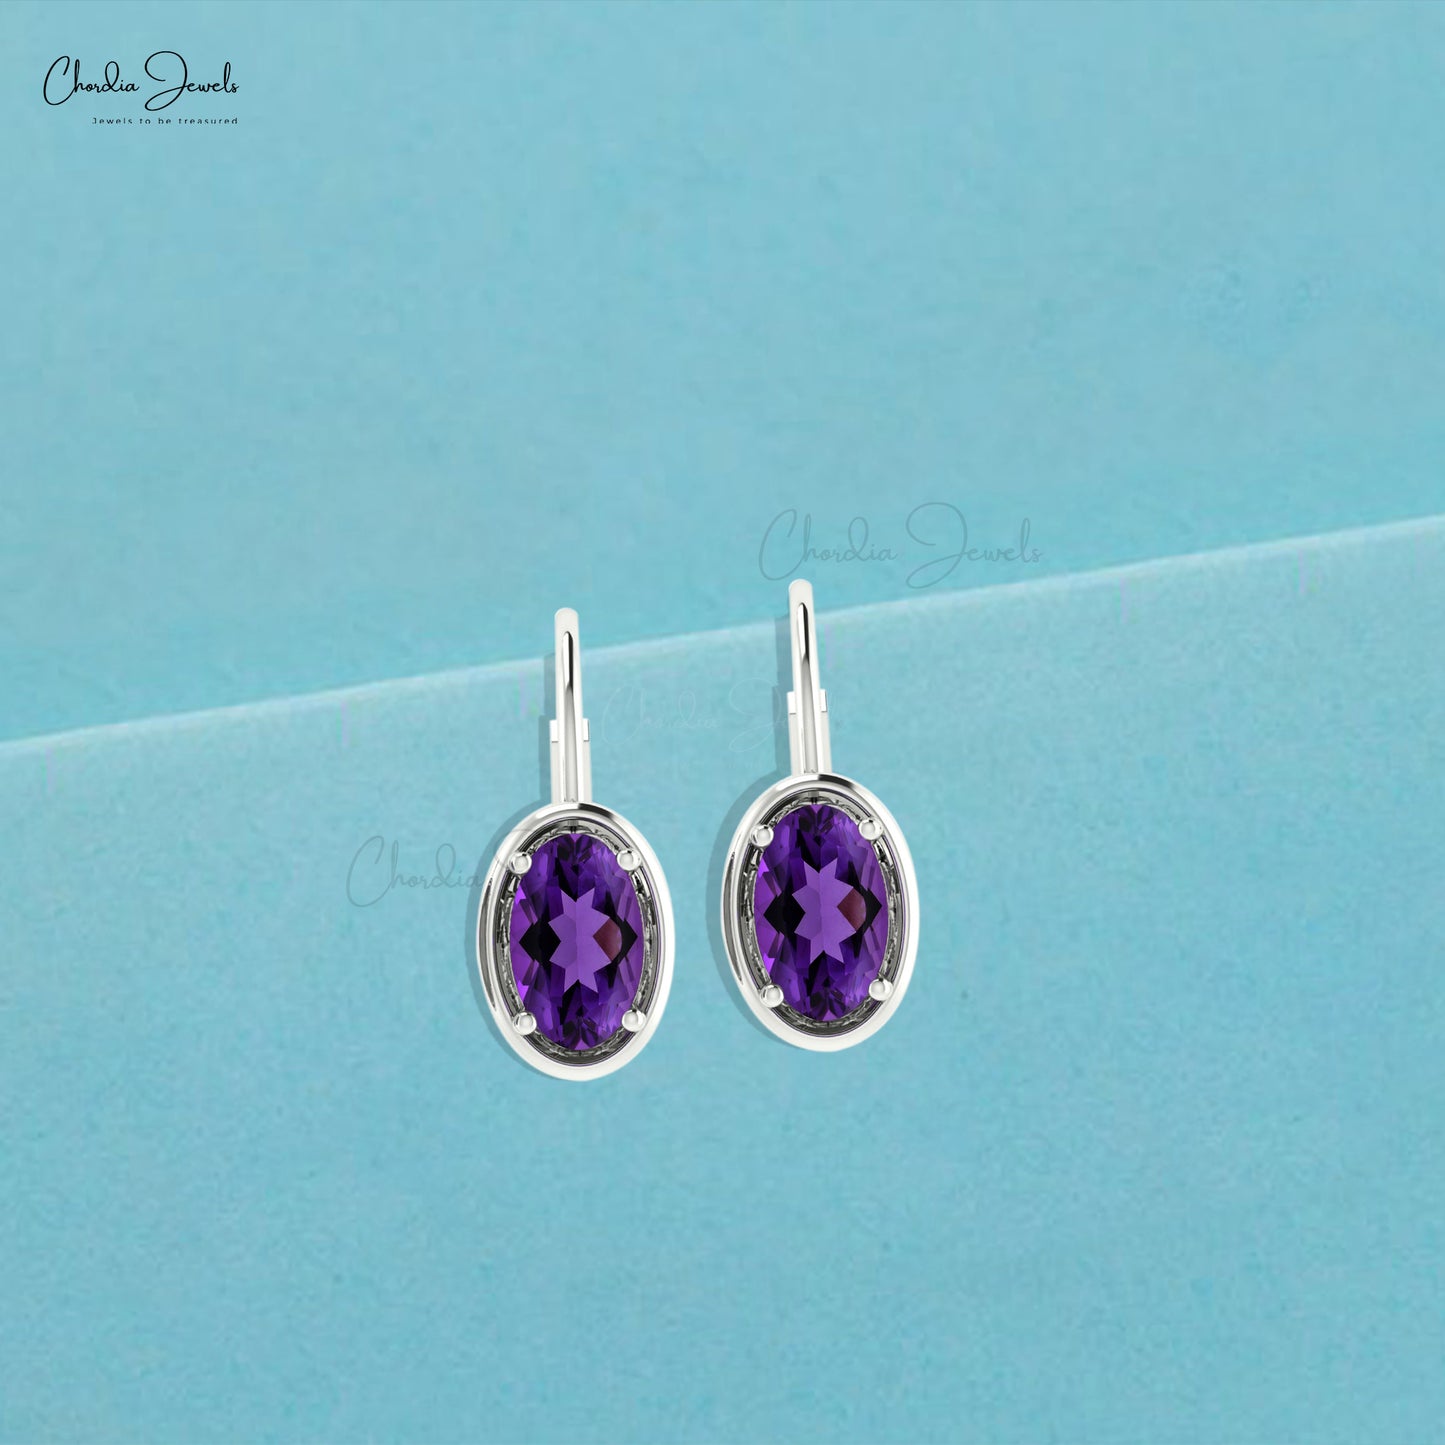 Amethyst Dangle 7x5mm Oval Faceted Lever Back Hoop Earrings for Her in 14k White Gold